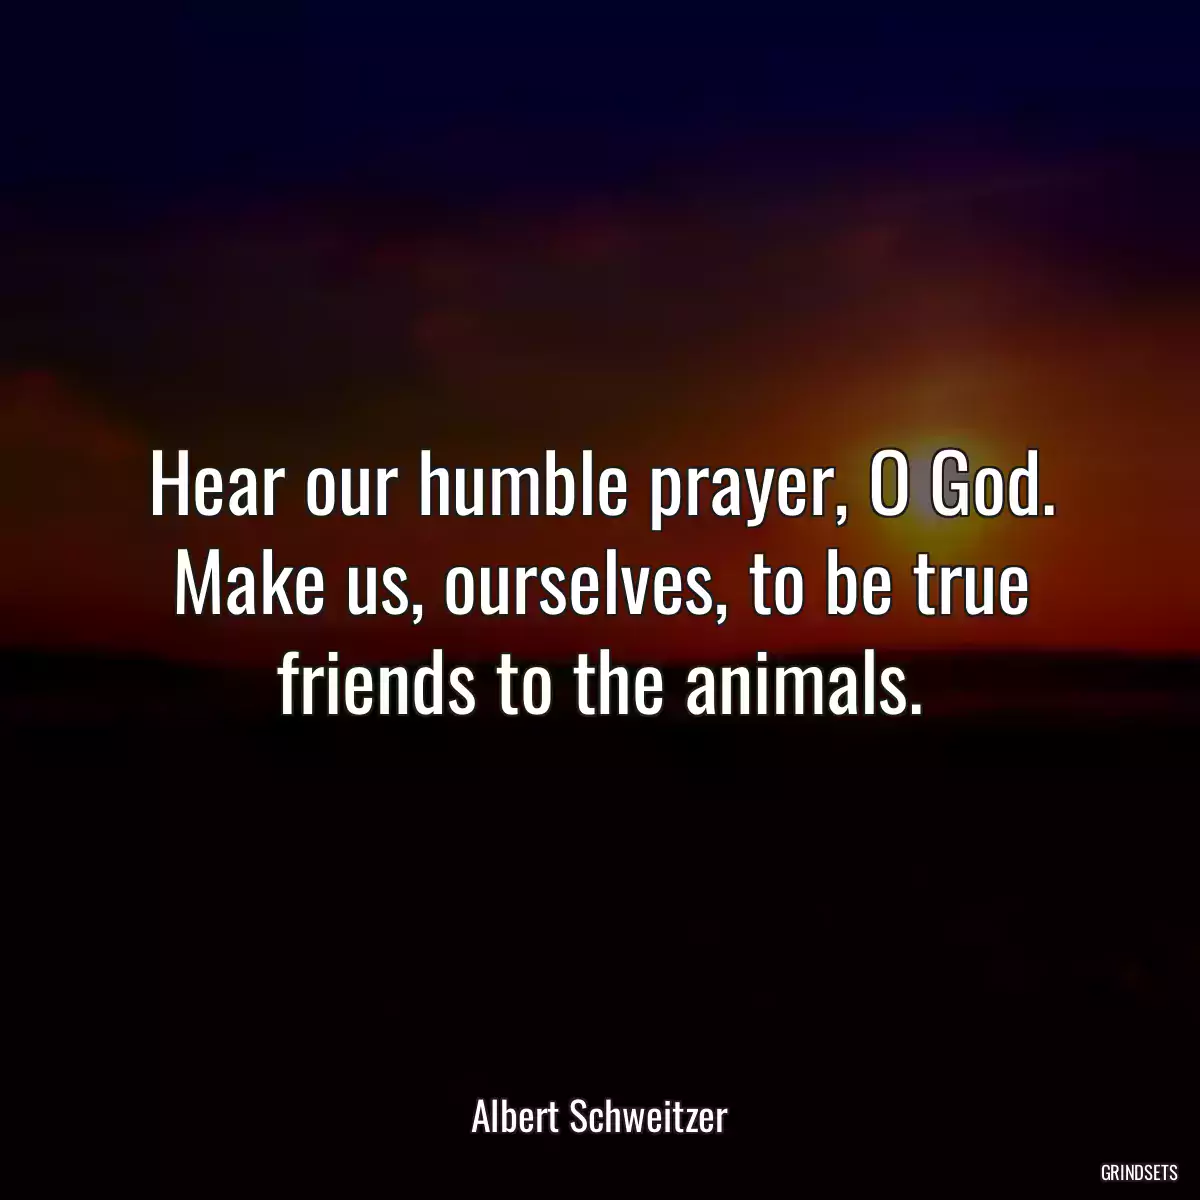 Hear our humble prayer, O God. Make us, ourselves, to be true friends to the animals.